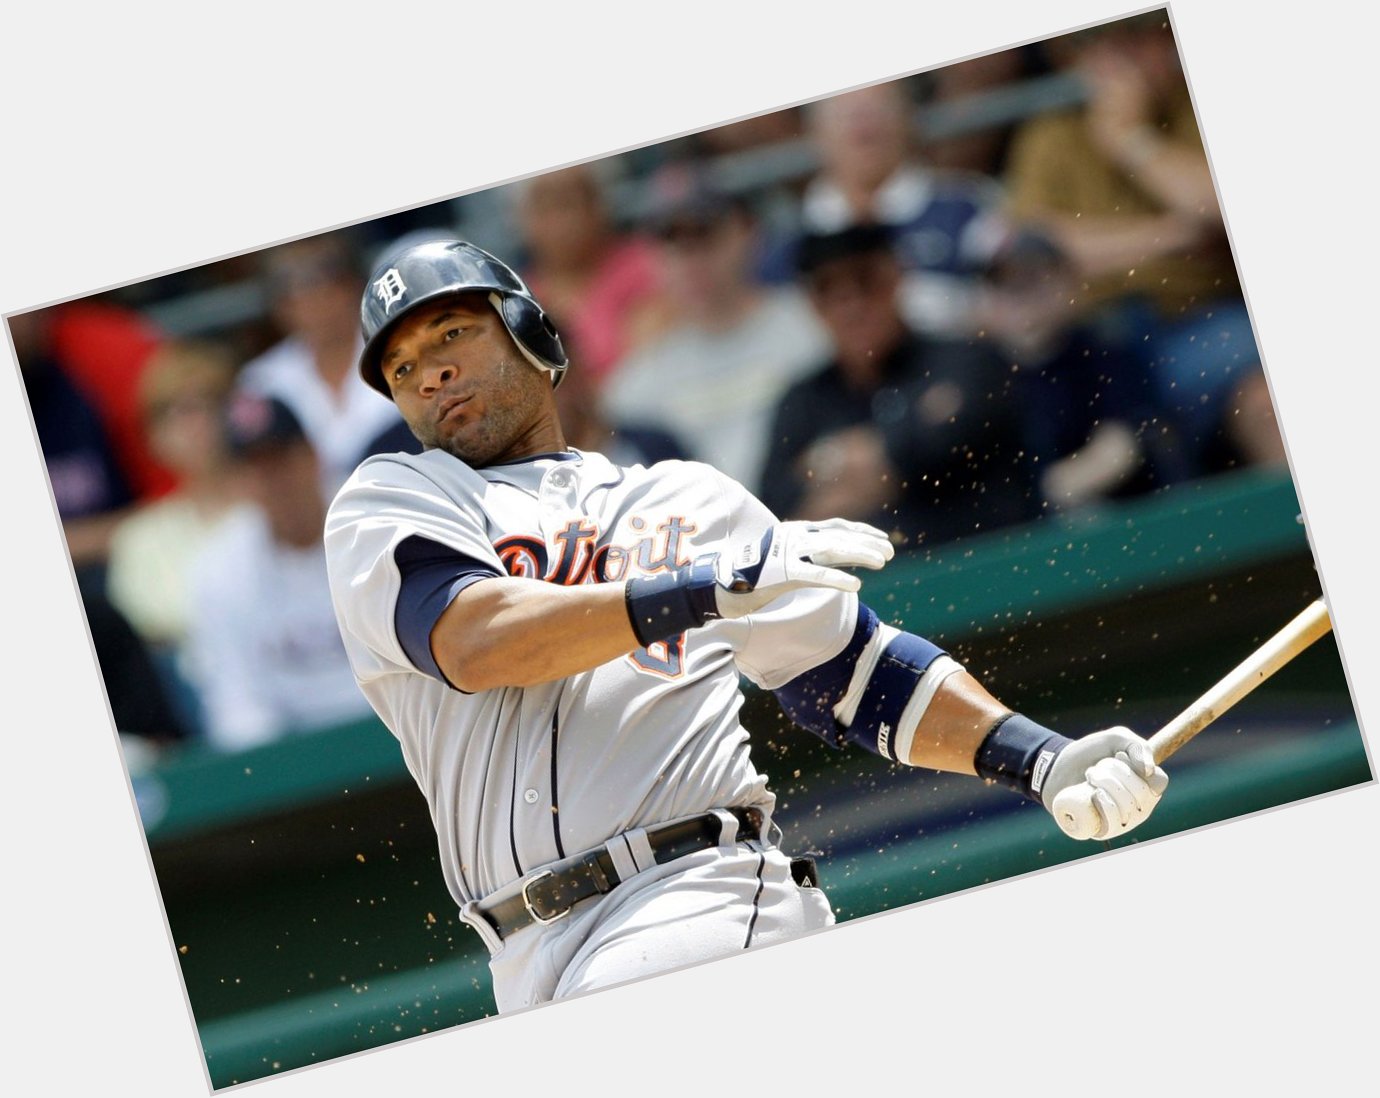 Happy 46th birthday to Gary Sheffield. He will appear on the next BBWAA Hall of Fame ballot his Hall Rating is 114. 